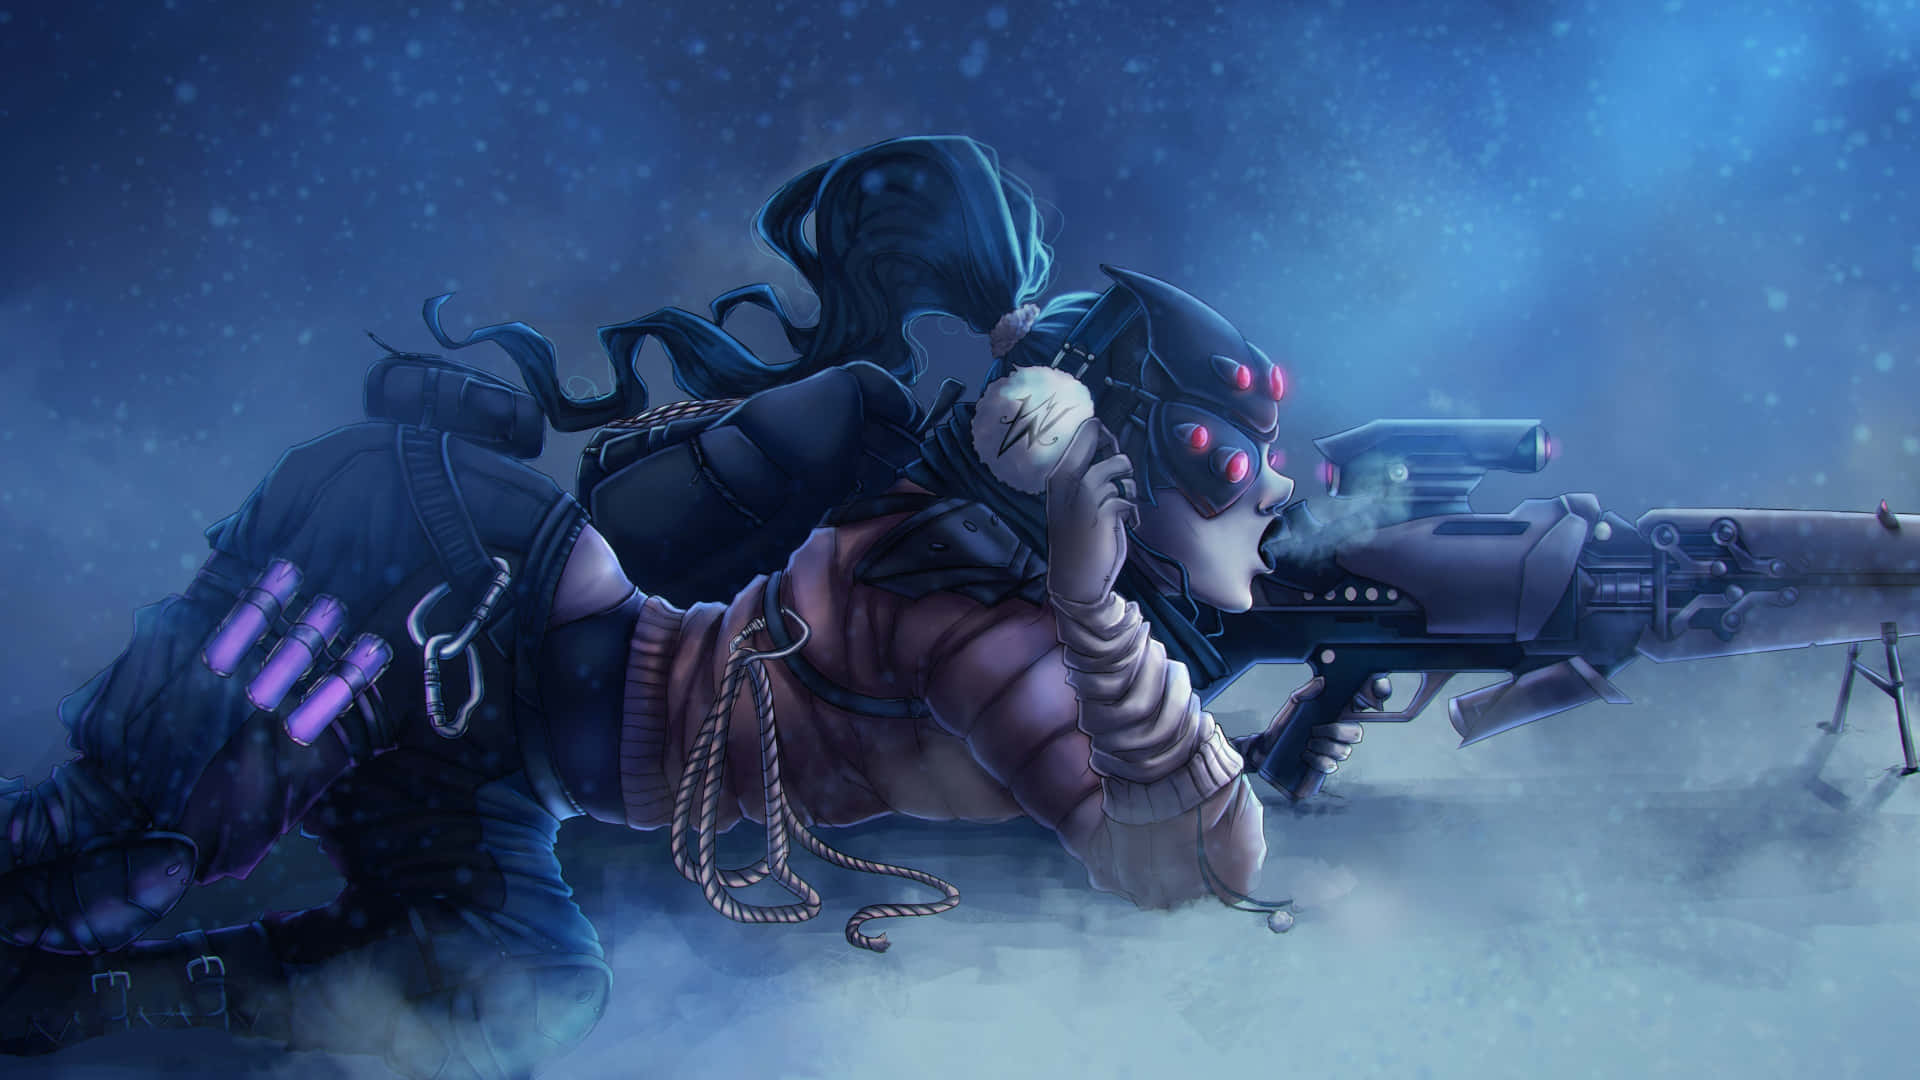 The beautiful but deadly Widowmaker ready to take out her enemies. Wallpaper